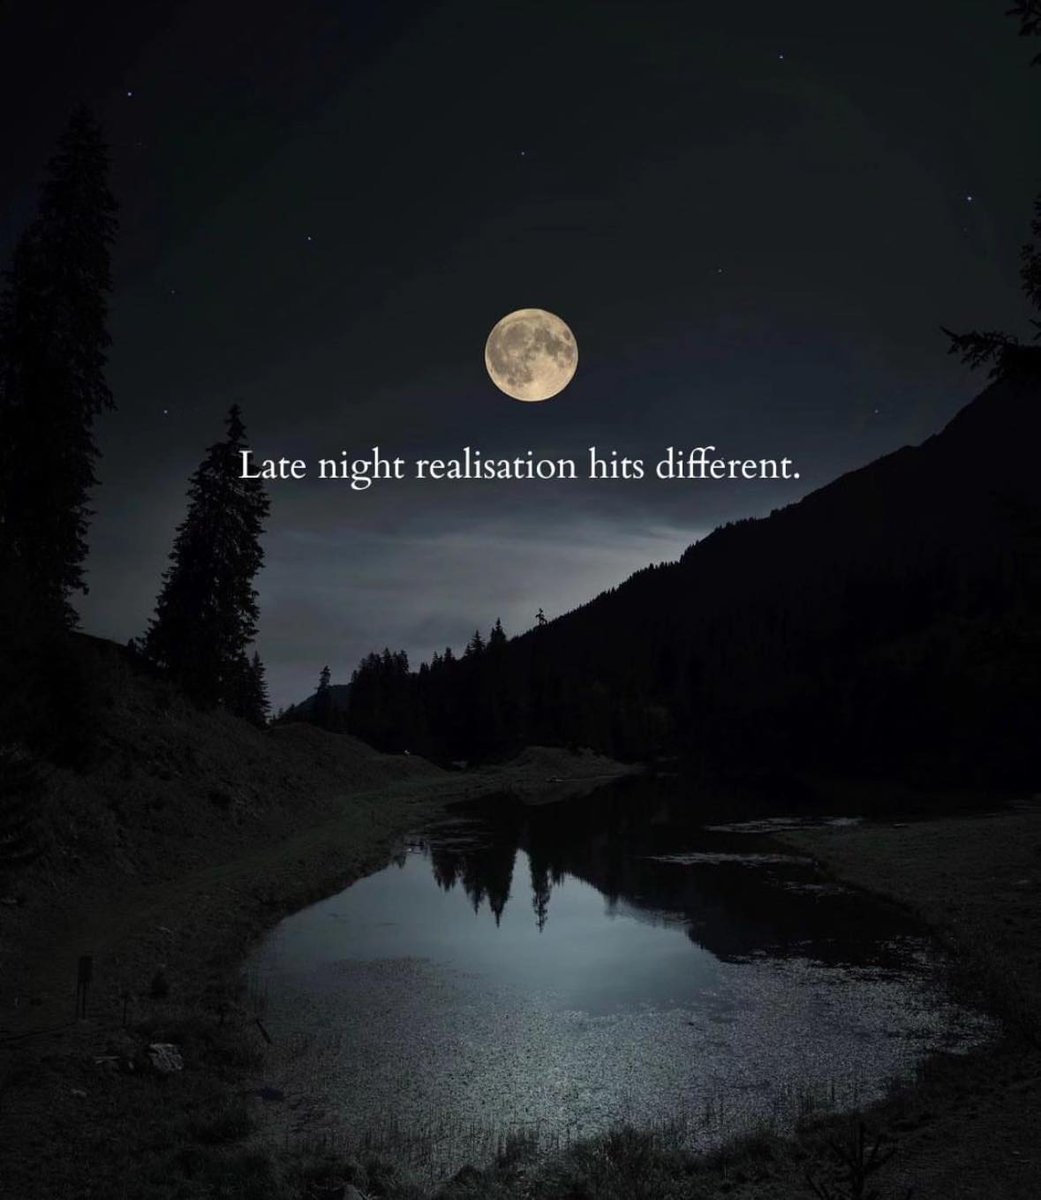 Late-night realizations hit differently.
Embrace the clarity that darkness brings. 🌙💡

#LateNightThoughts #Epiphany